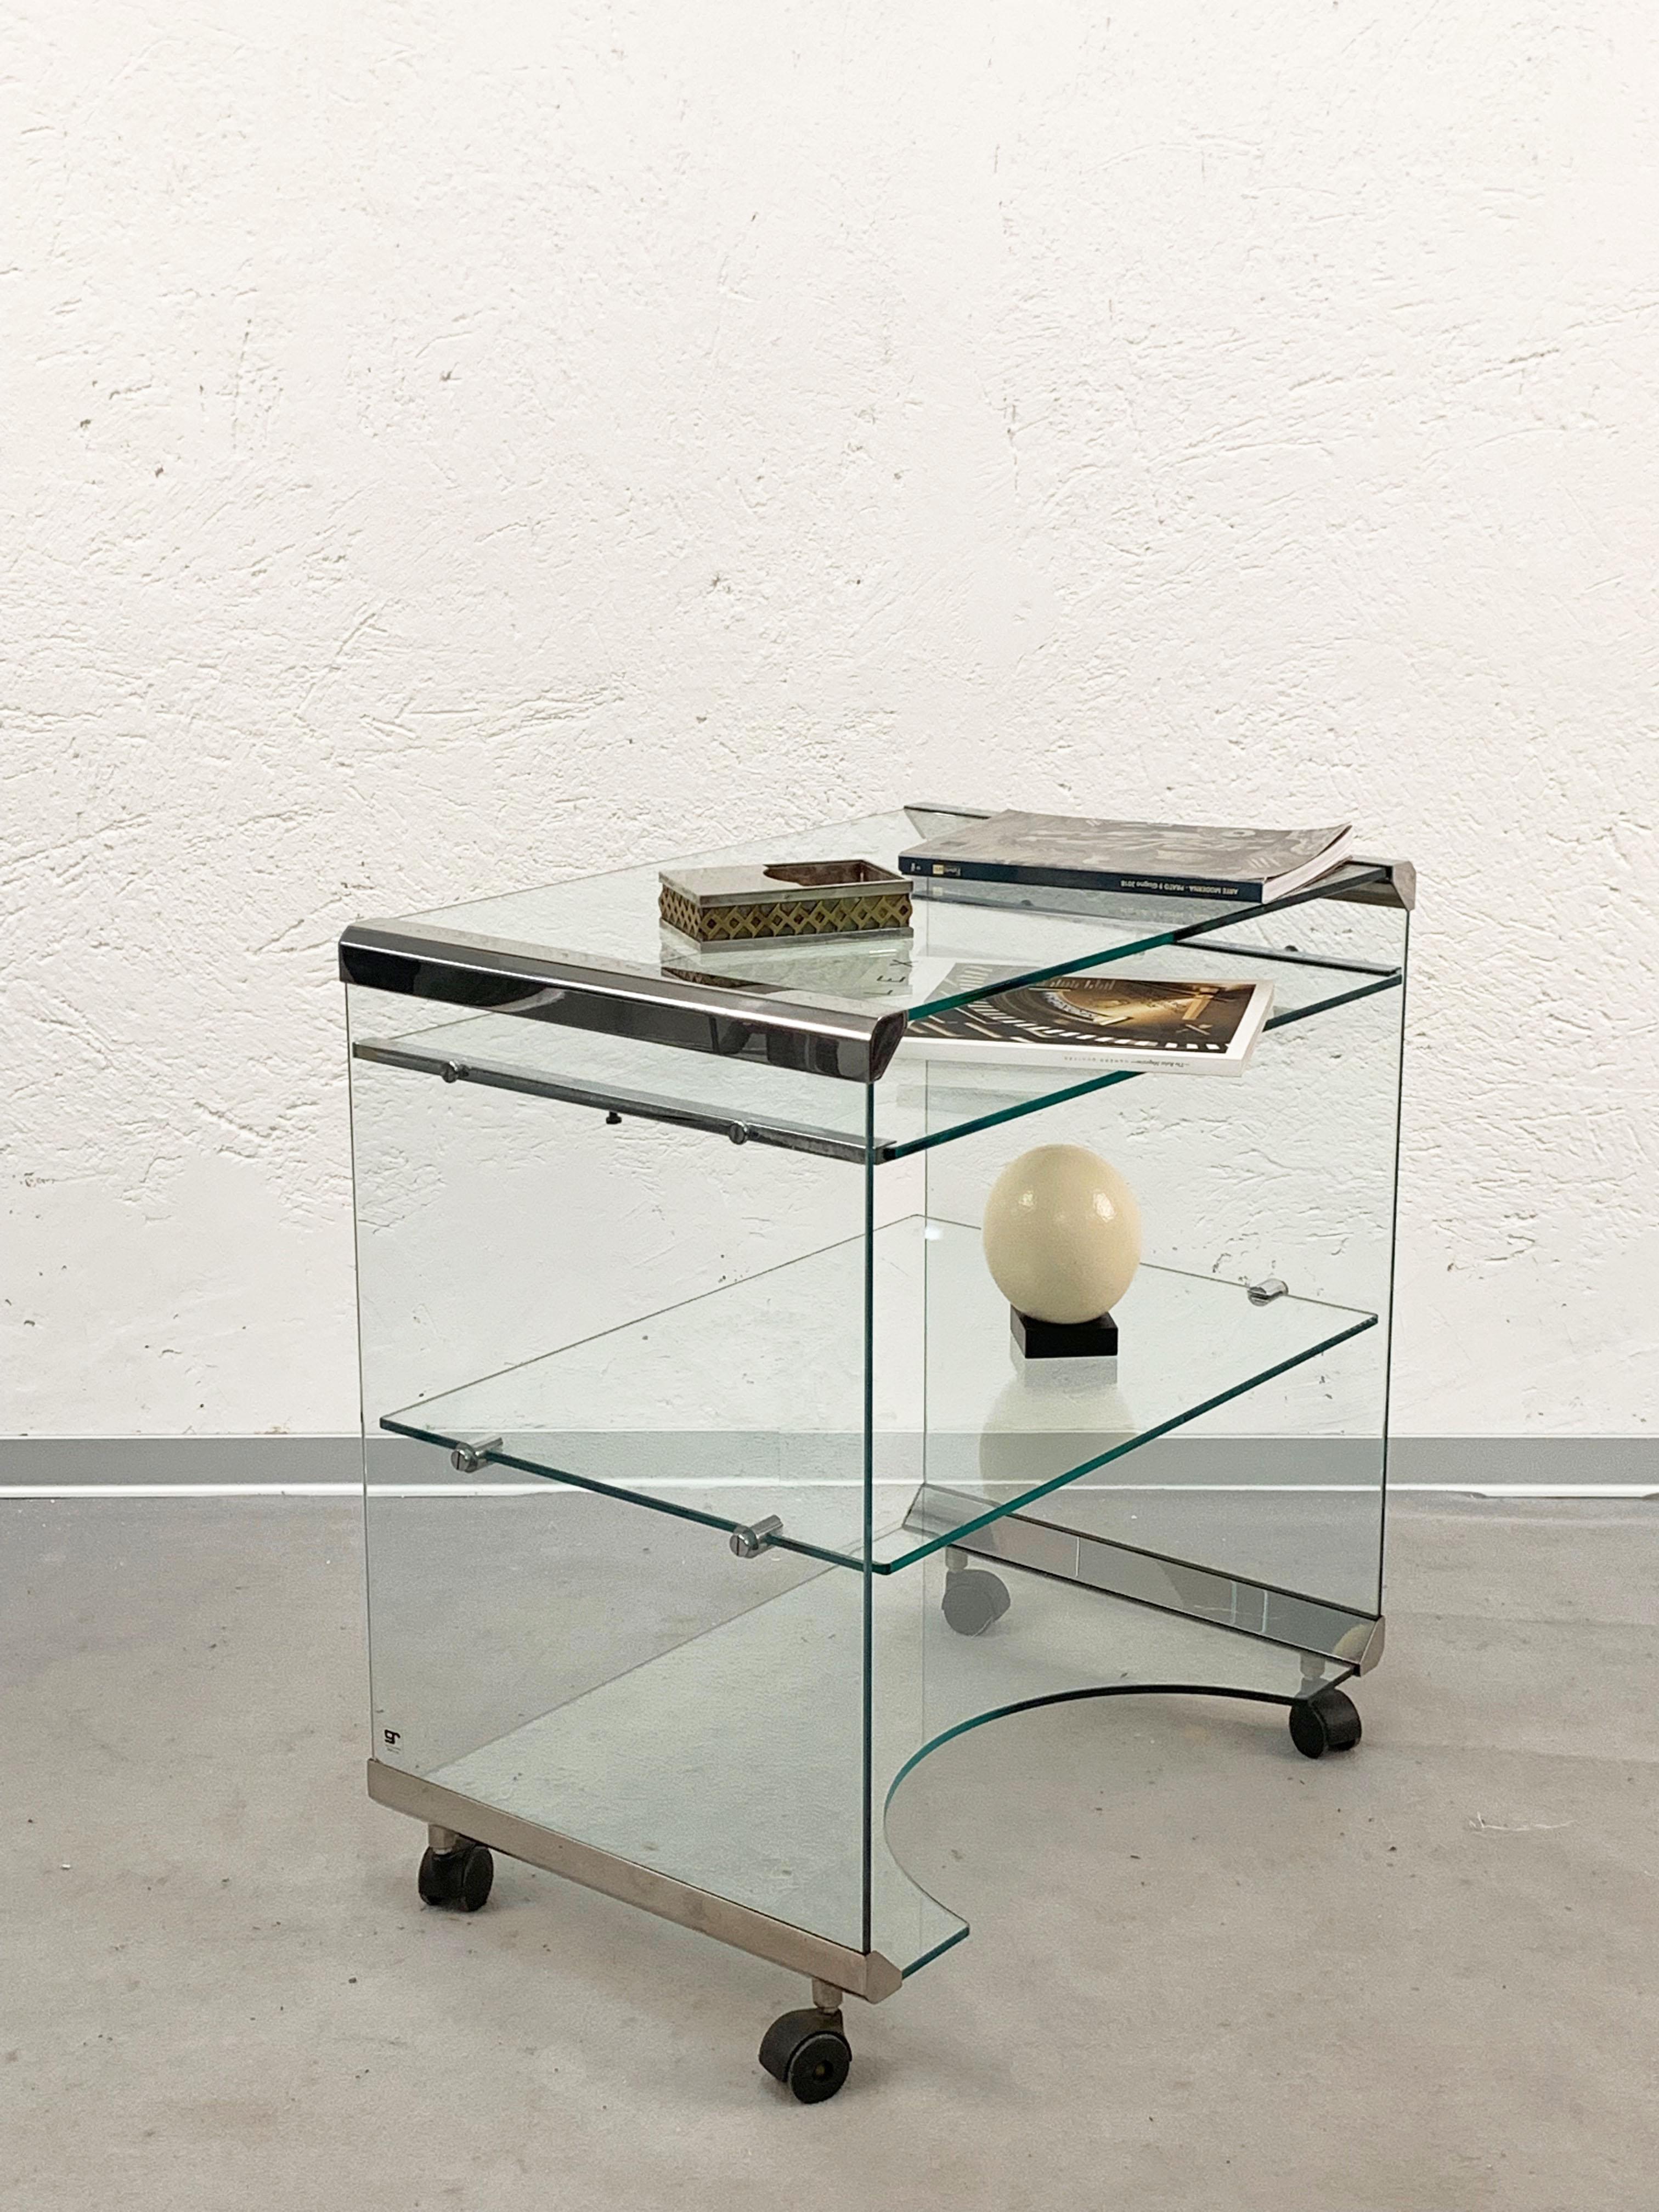 Gallotti & Radice in 8 mm transparent tempered glass. Metal parts in polished stainless steel. On wheels

This trolley is a functional piece of furniture that can be placed in your living room.